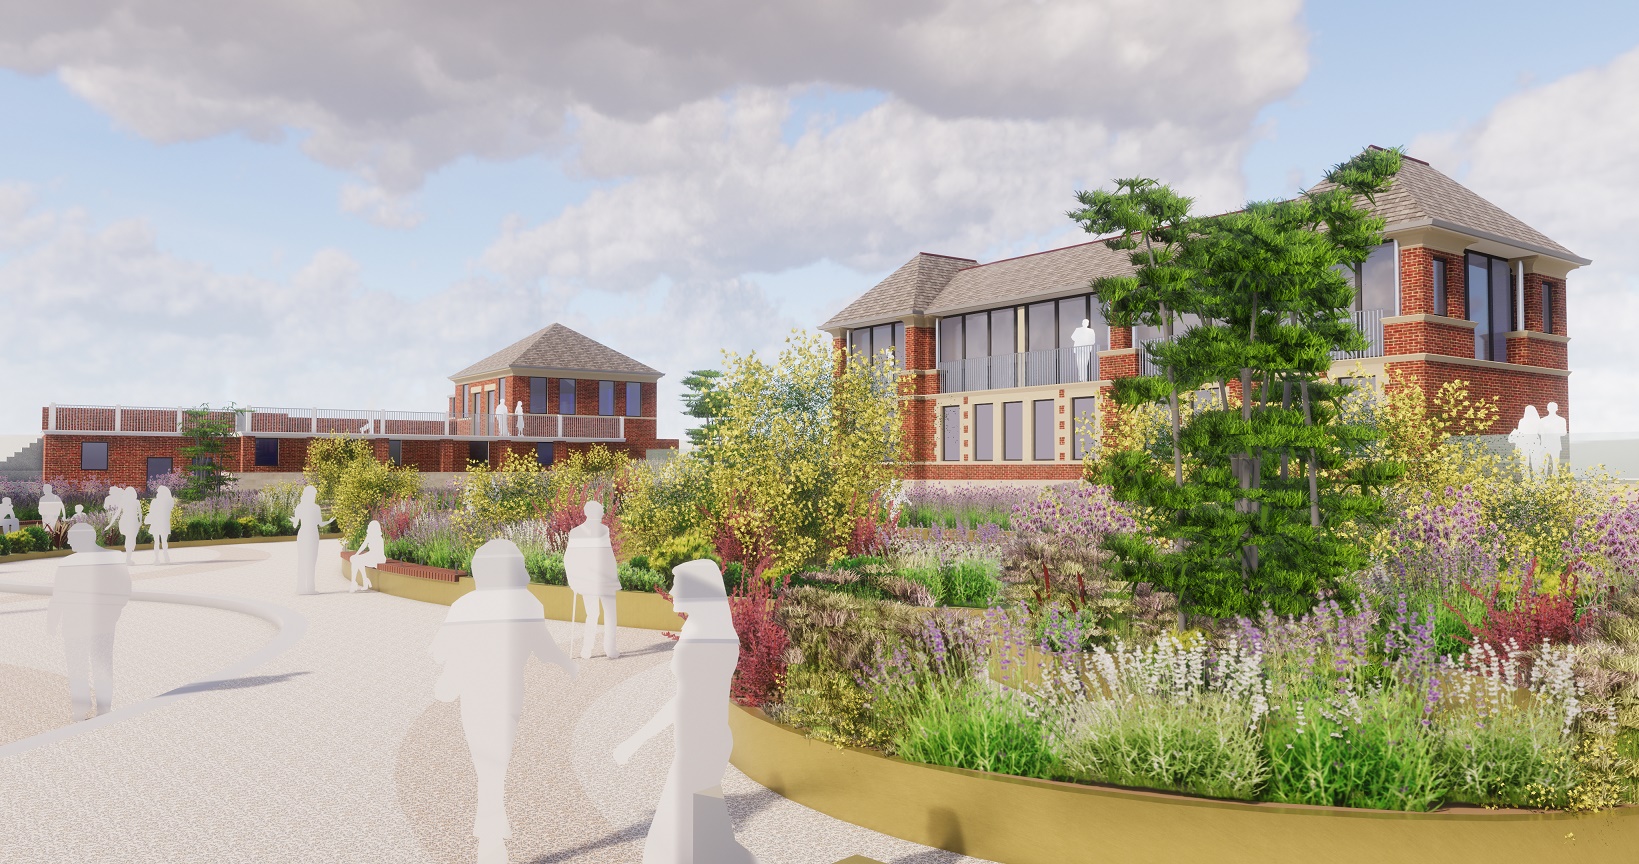 An artist's impression of how the lido site will look when it is opened to the public.